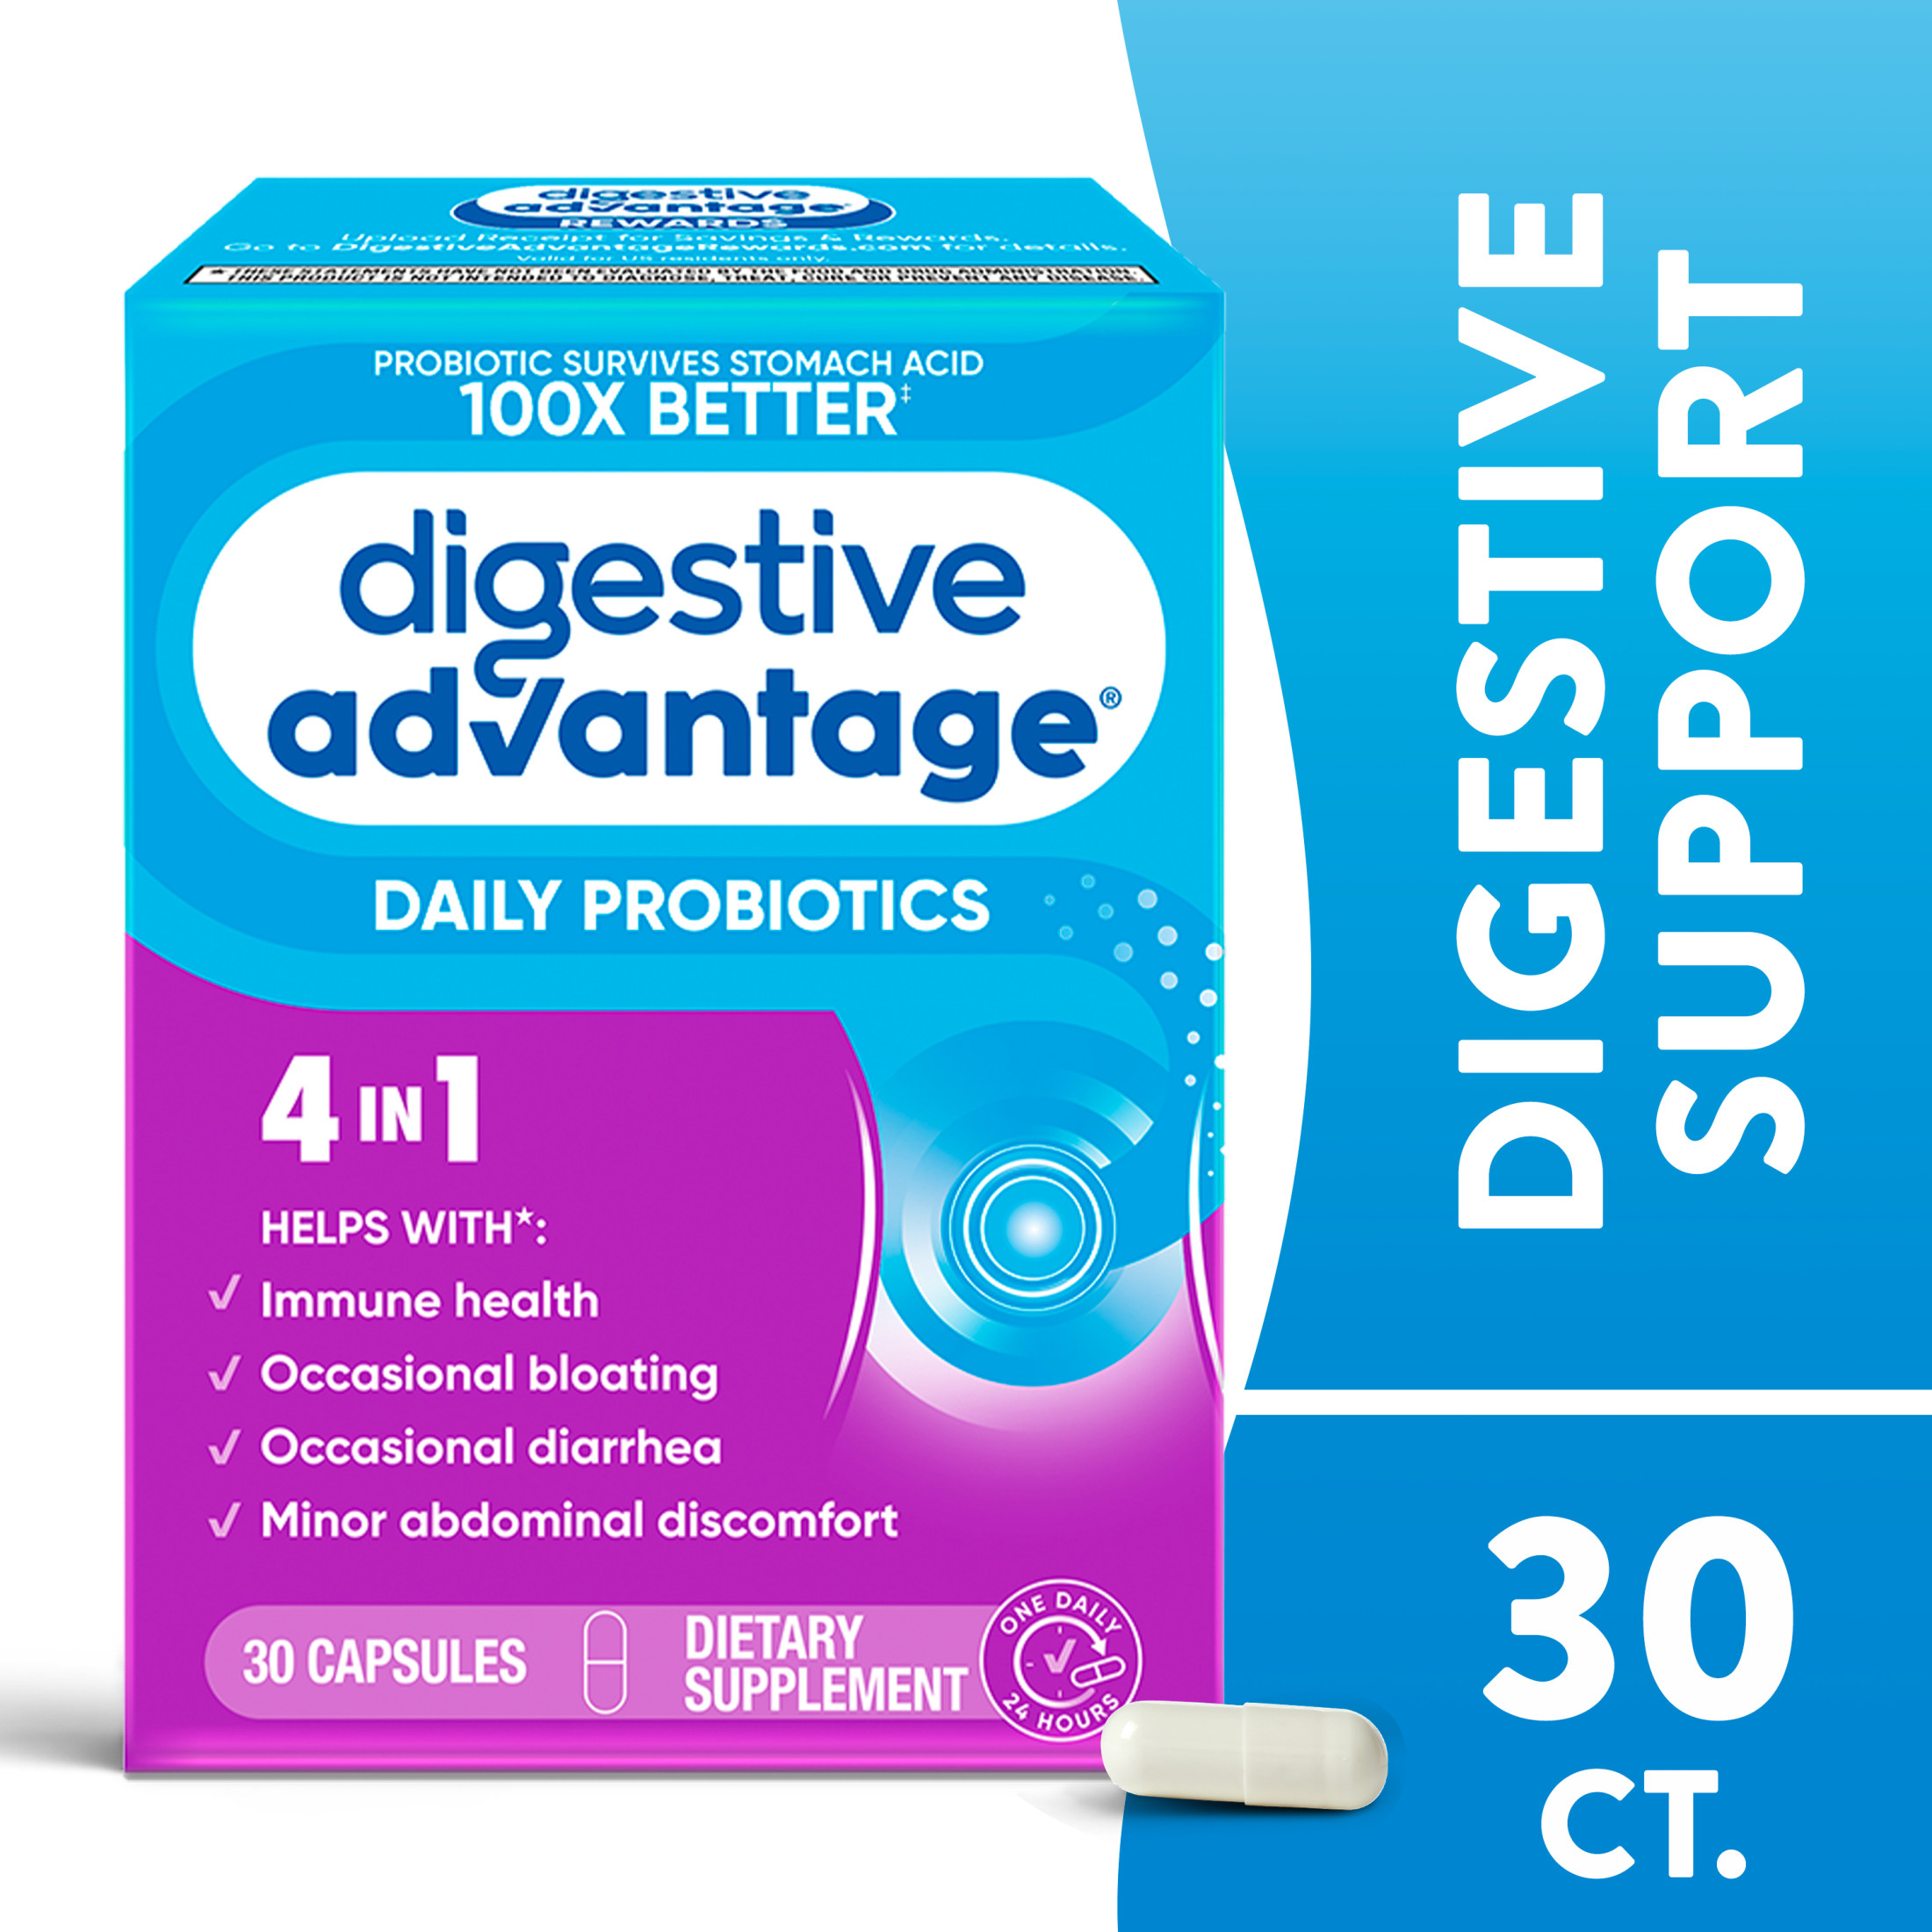 Digestive Advantage Daily Probiotic, Survives Better than 50 Billion - 30 Capsules - image 1 of 11